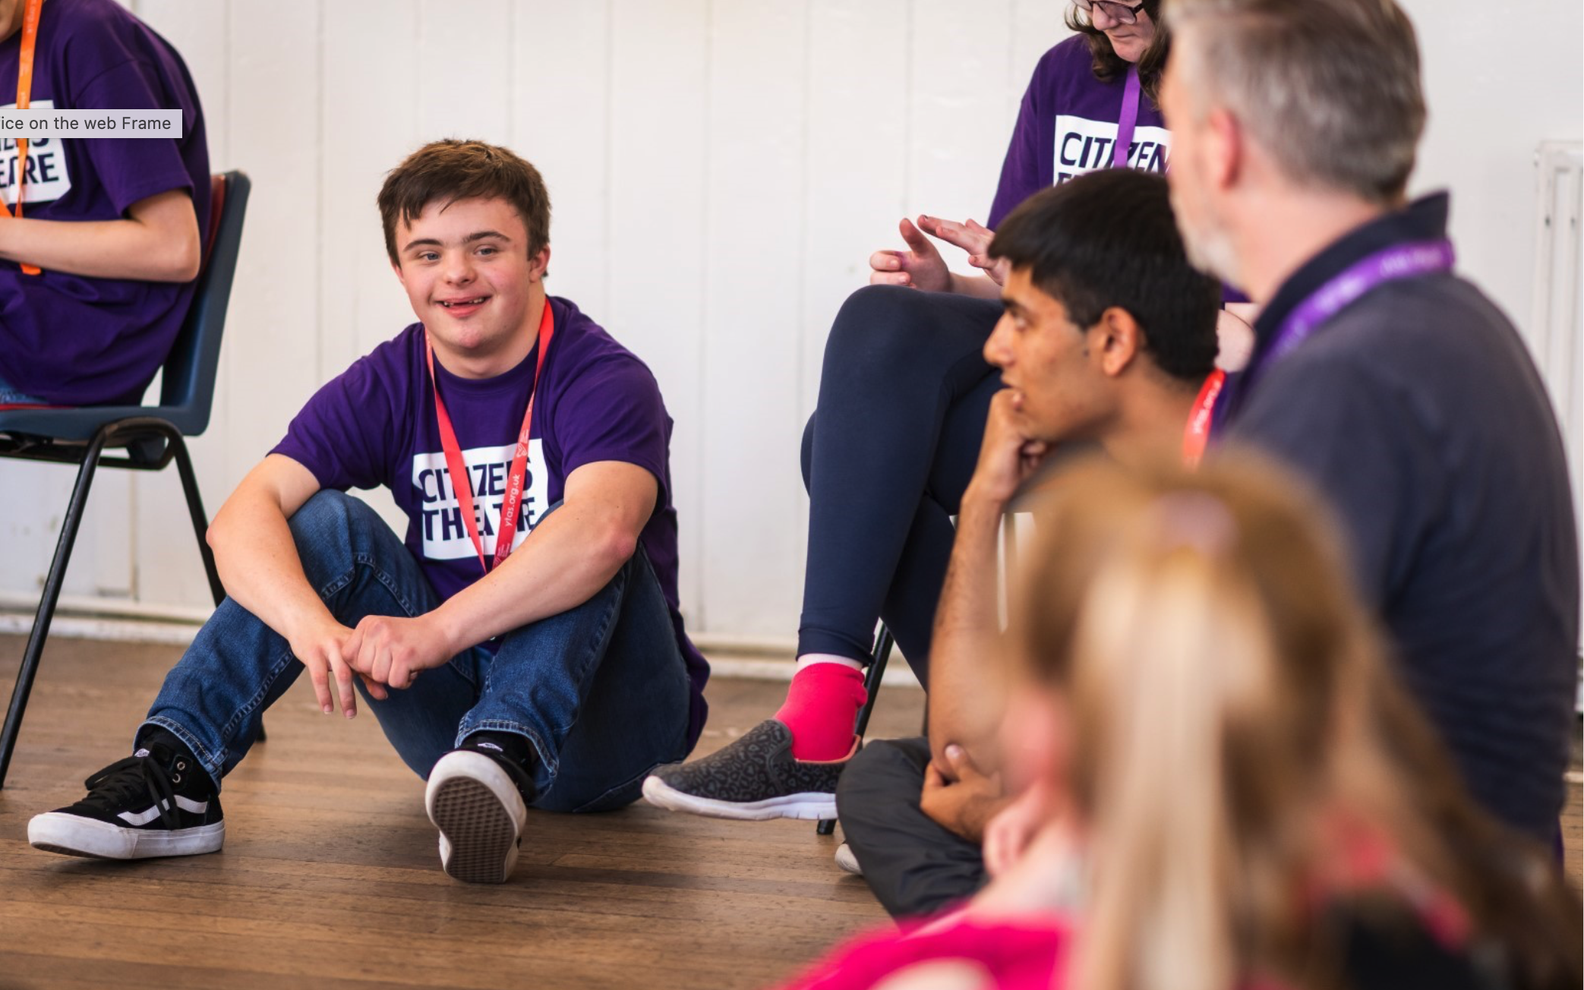 A group of learning disabled young people sit on chairs and on the floor. In focus, a young man in a purple Saturday Citizens listens to an instructor speak.